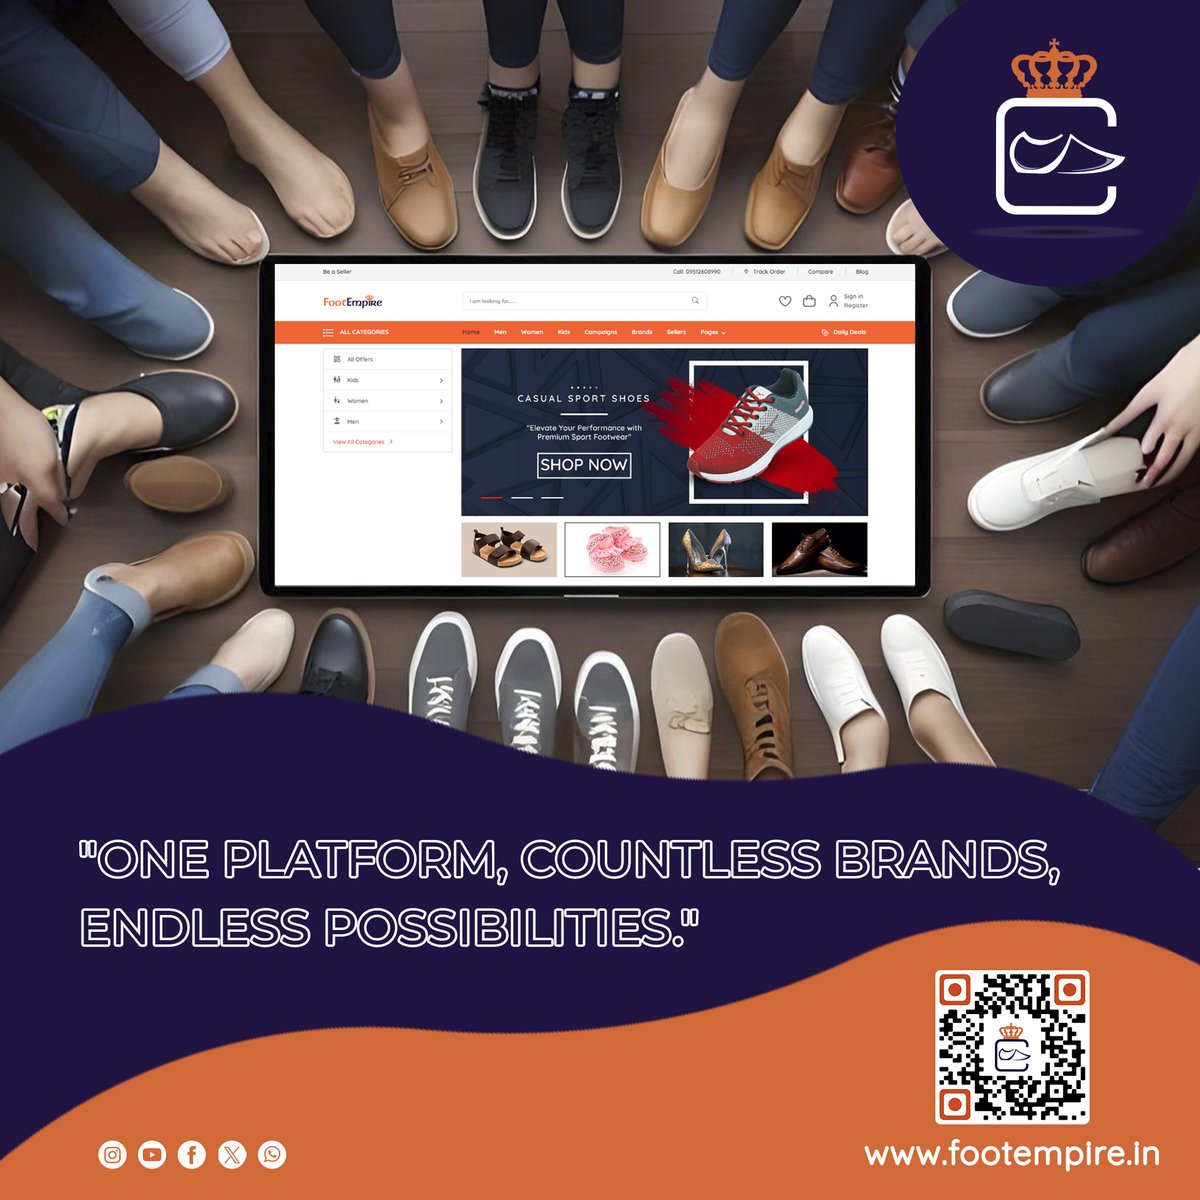 Sole searching? We got you. Countless brands, all in one place #shoeshopping #footwear #fashion #style #onlineshopping #sneakers #heels #boots #sandals #flats #musthave #ootd #shoeaddict #discover